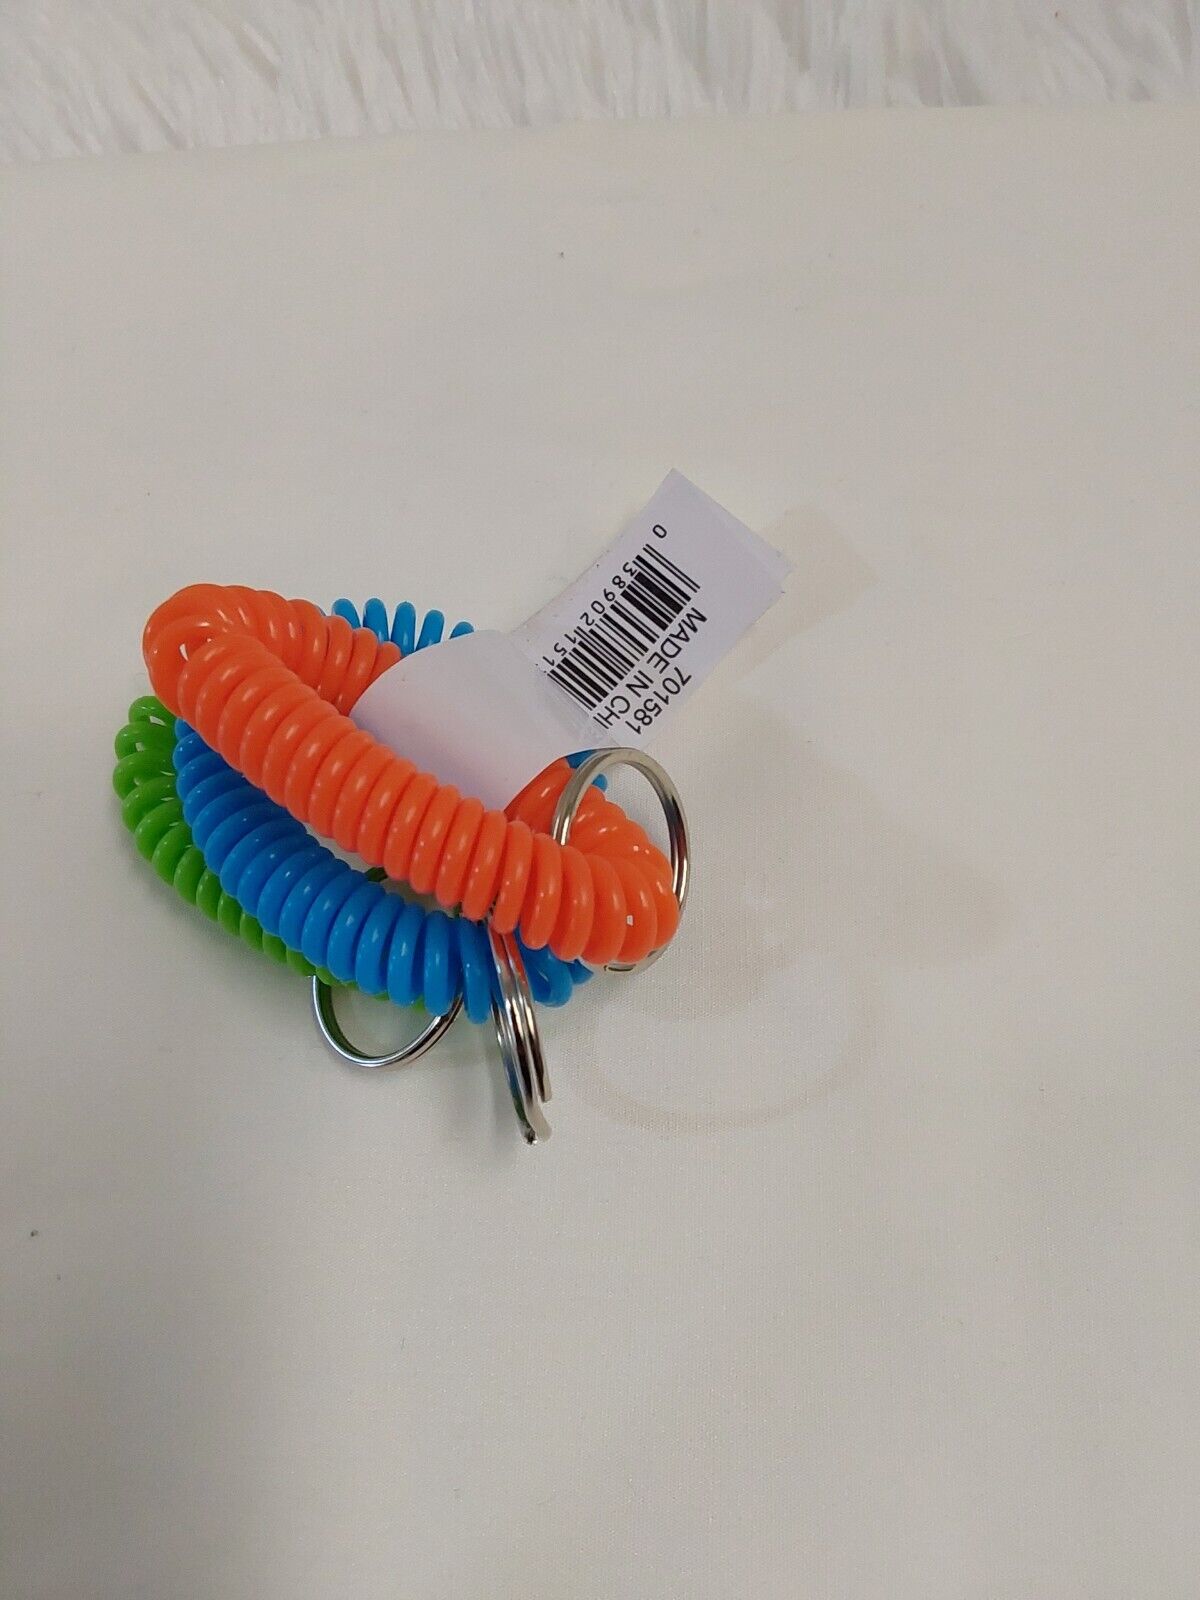 Spiral Wrist Stretchable Coil Key Holders 3-pieces Orange, Blue & Green Bnwt!